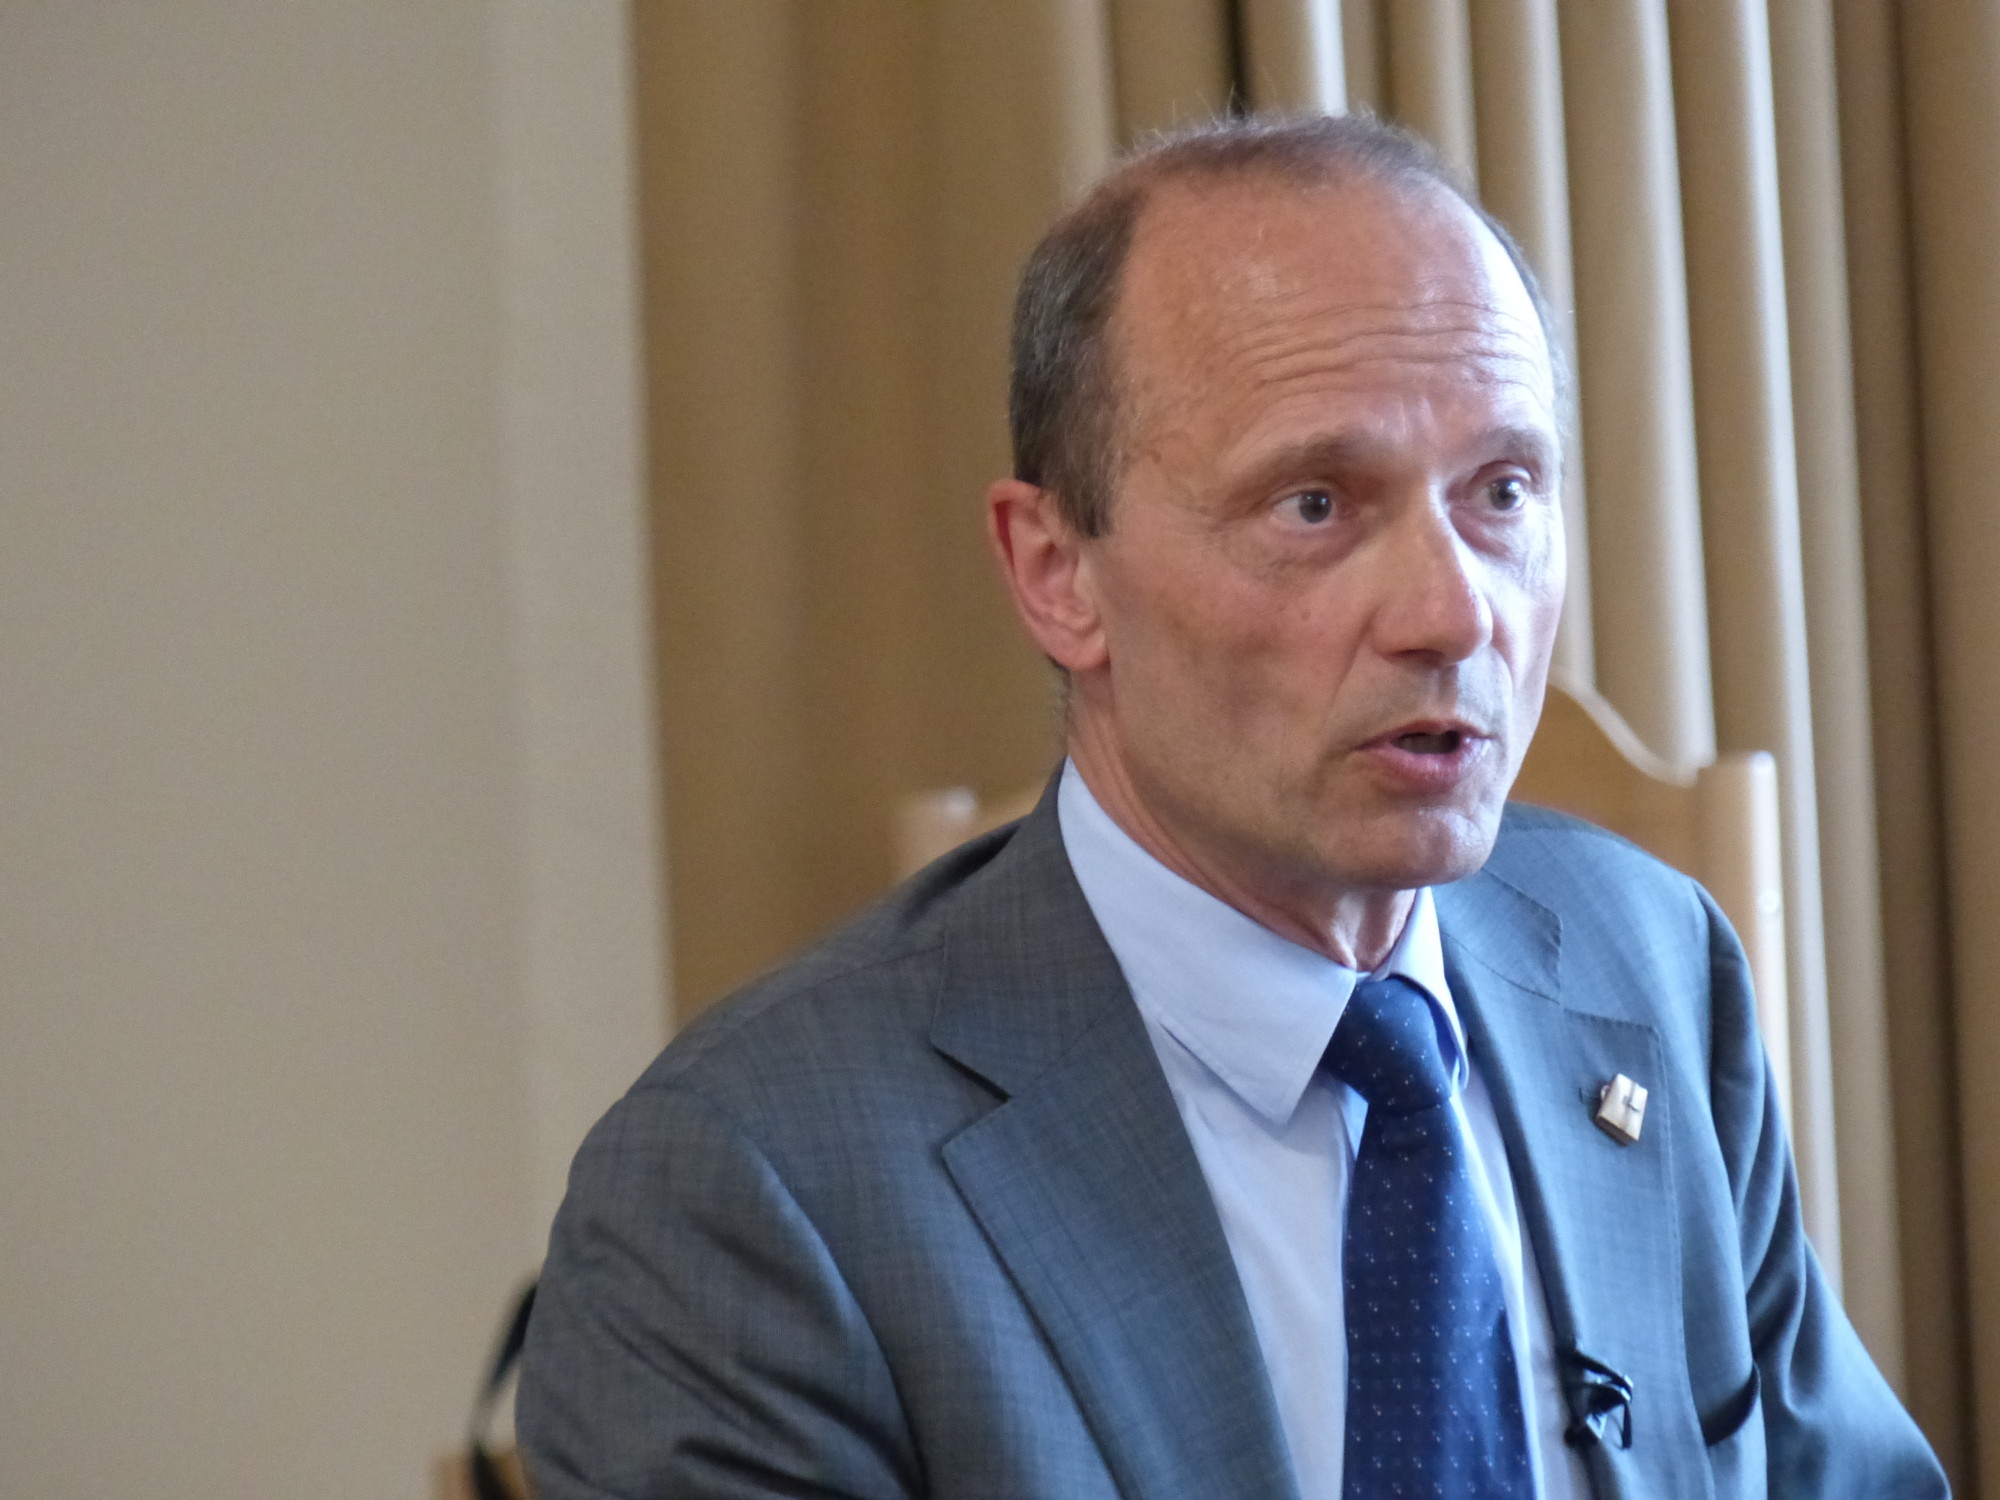 Morten Kjaerum during his lecture on human rights in times of confusion